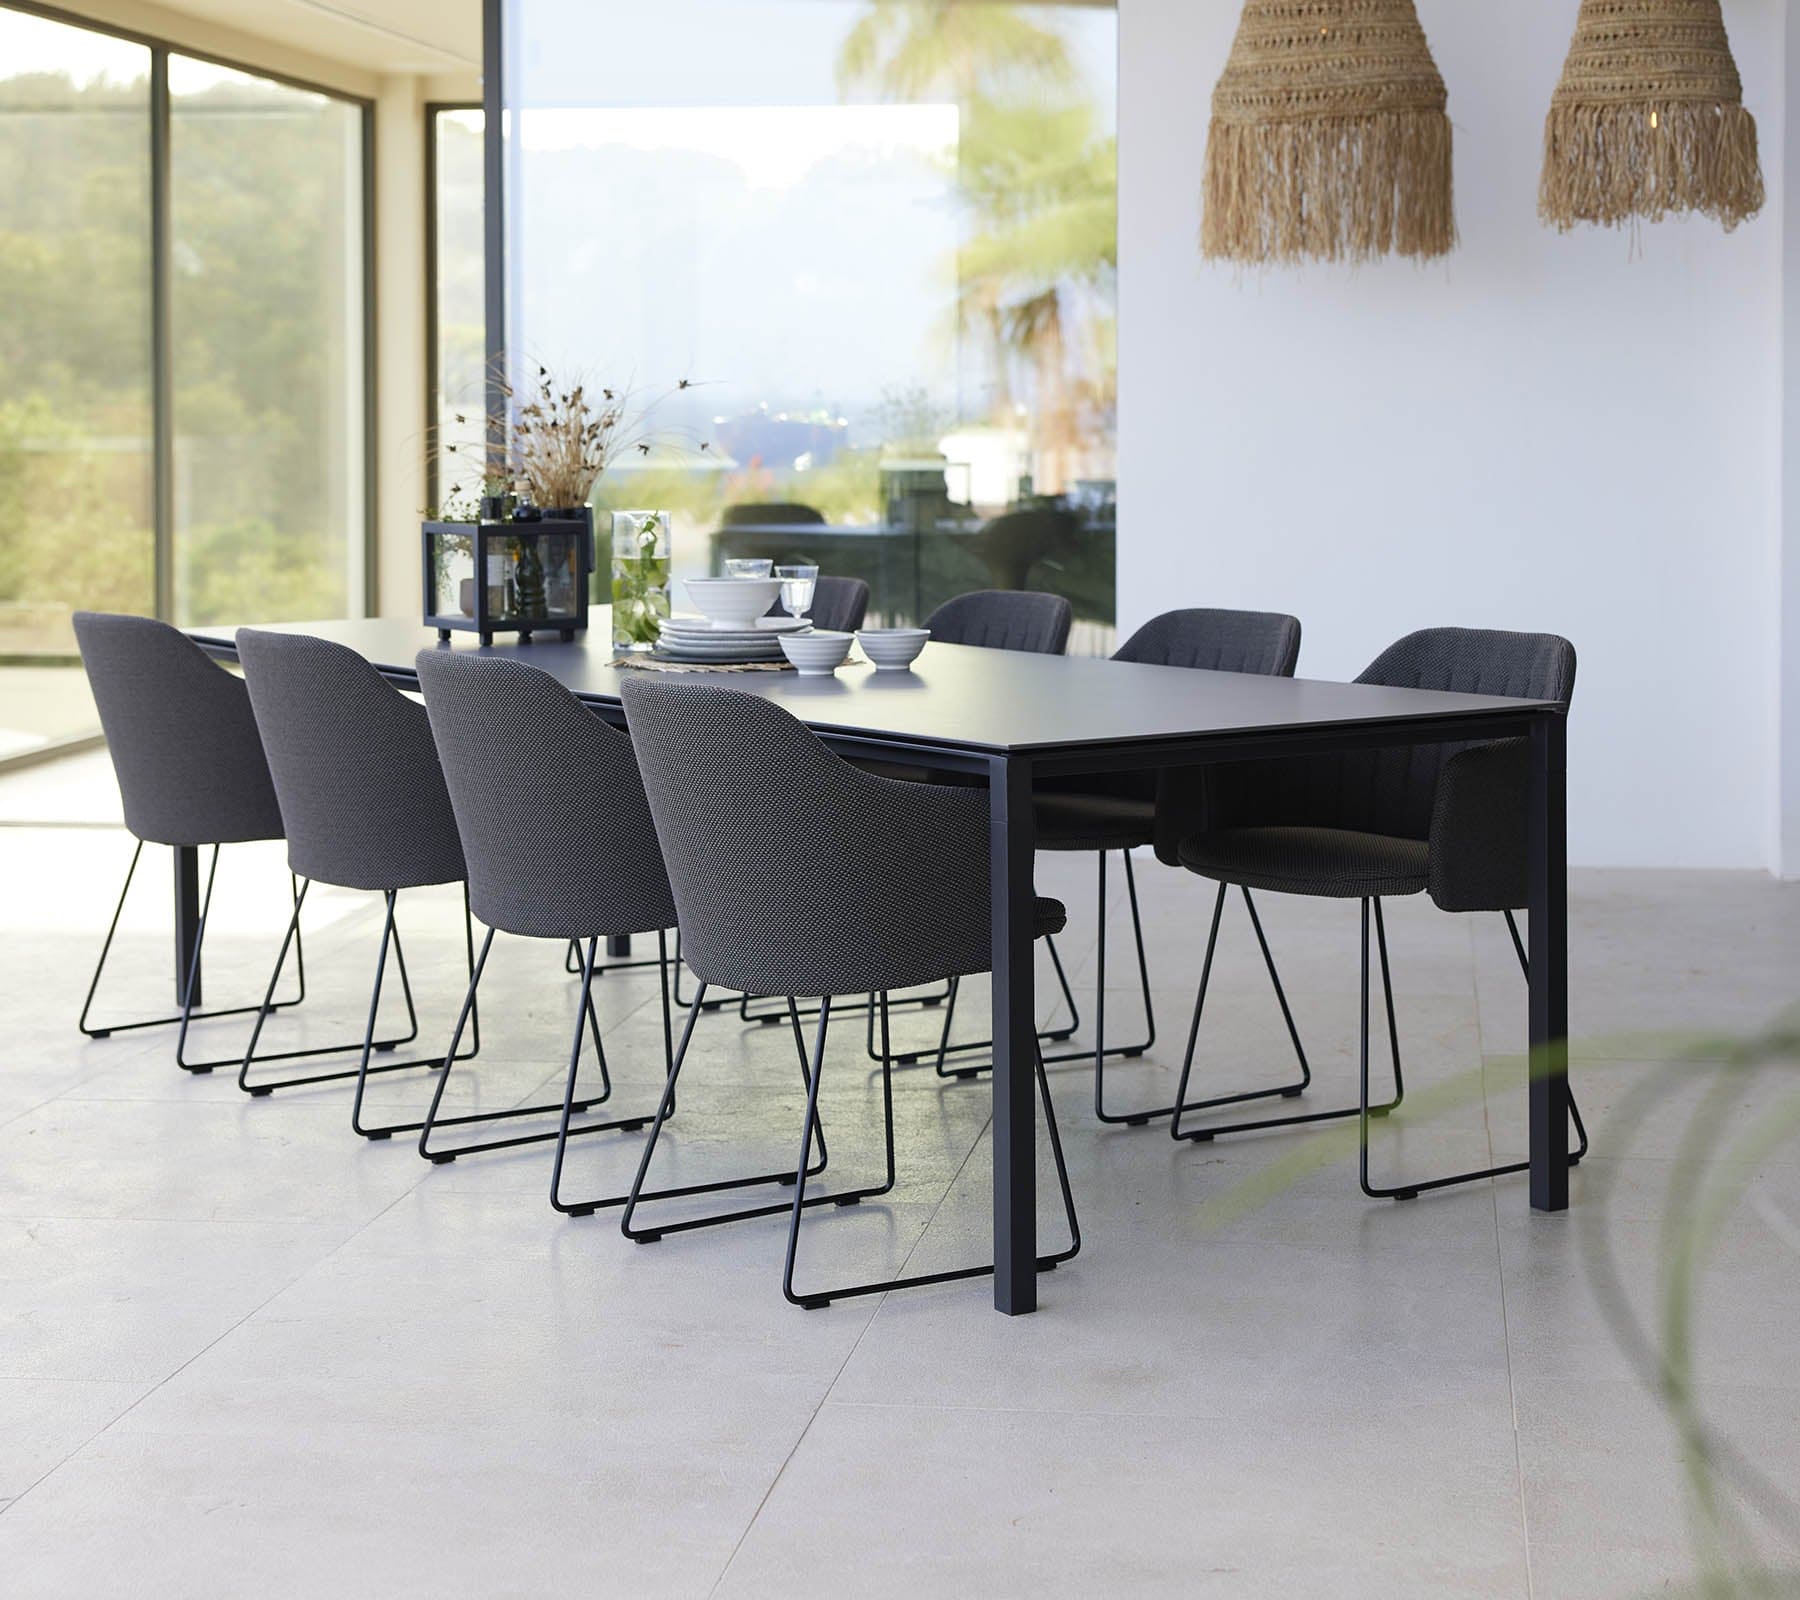 Boxhill's Choice Outdoor Dining Chair Warm Galvanized Steel Sledge Base lifestyle image with Pure Dining Table